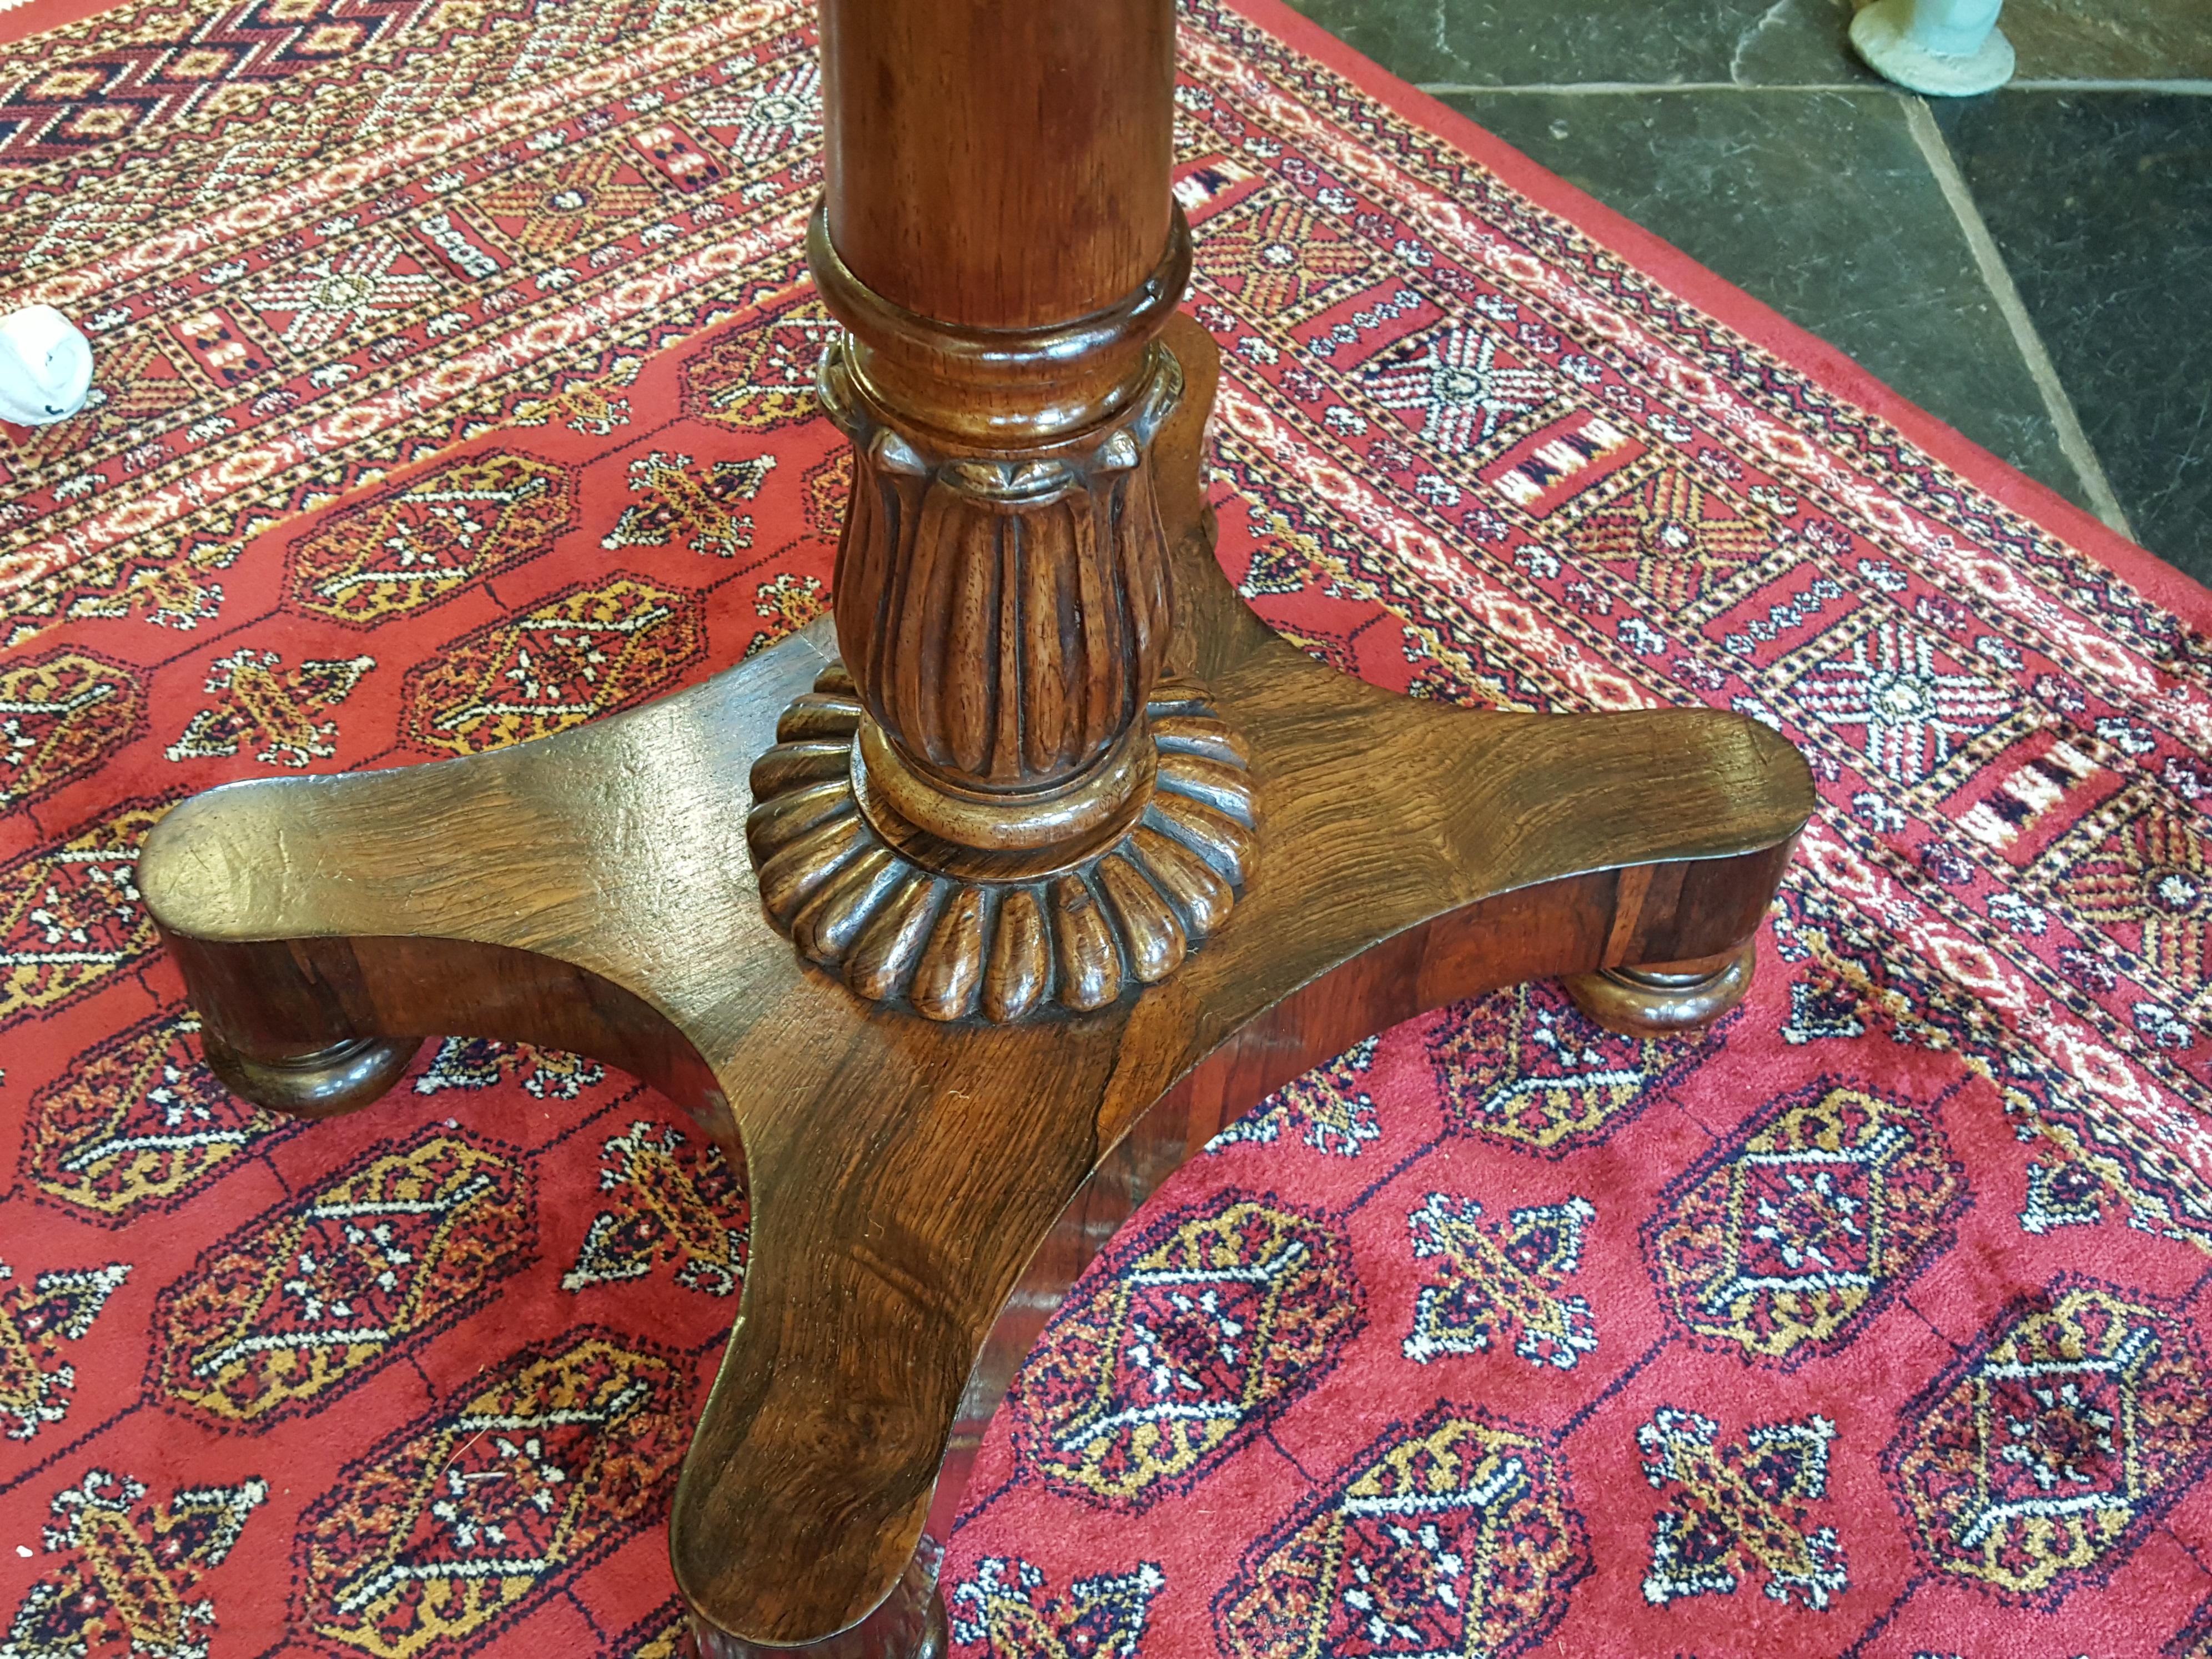 William IV rosewood side wine table with acanthus leaf carved column, gadrooned quadriform base and bun feet.
Measures: 21